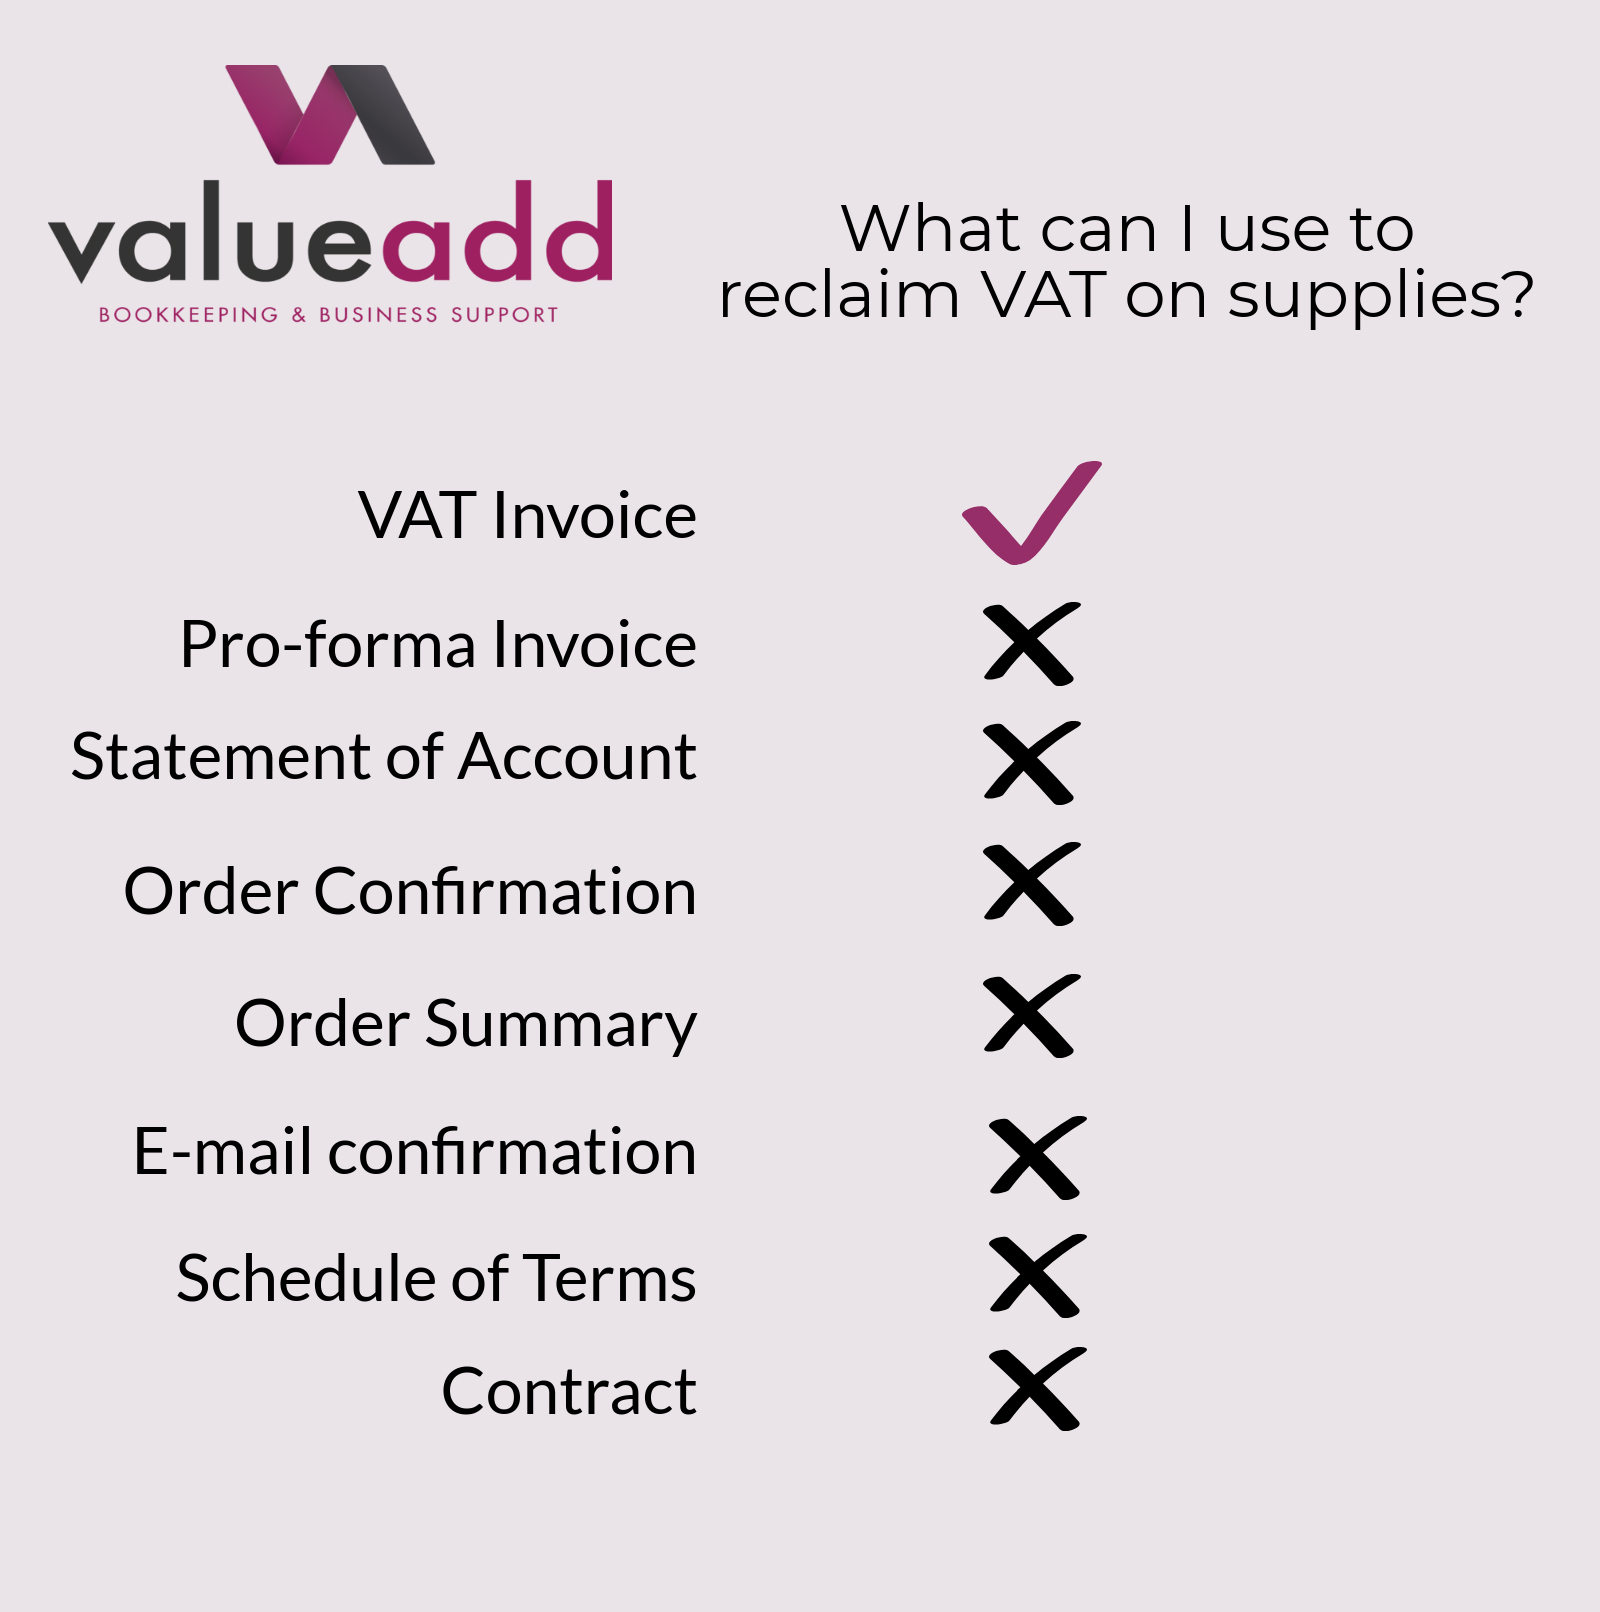 What can I use to reclaim VAT?